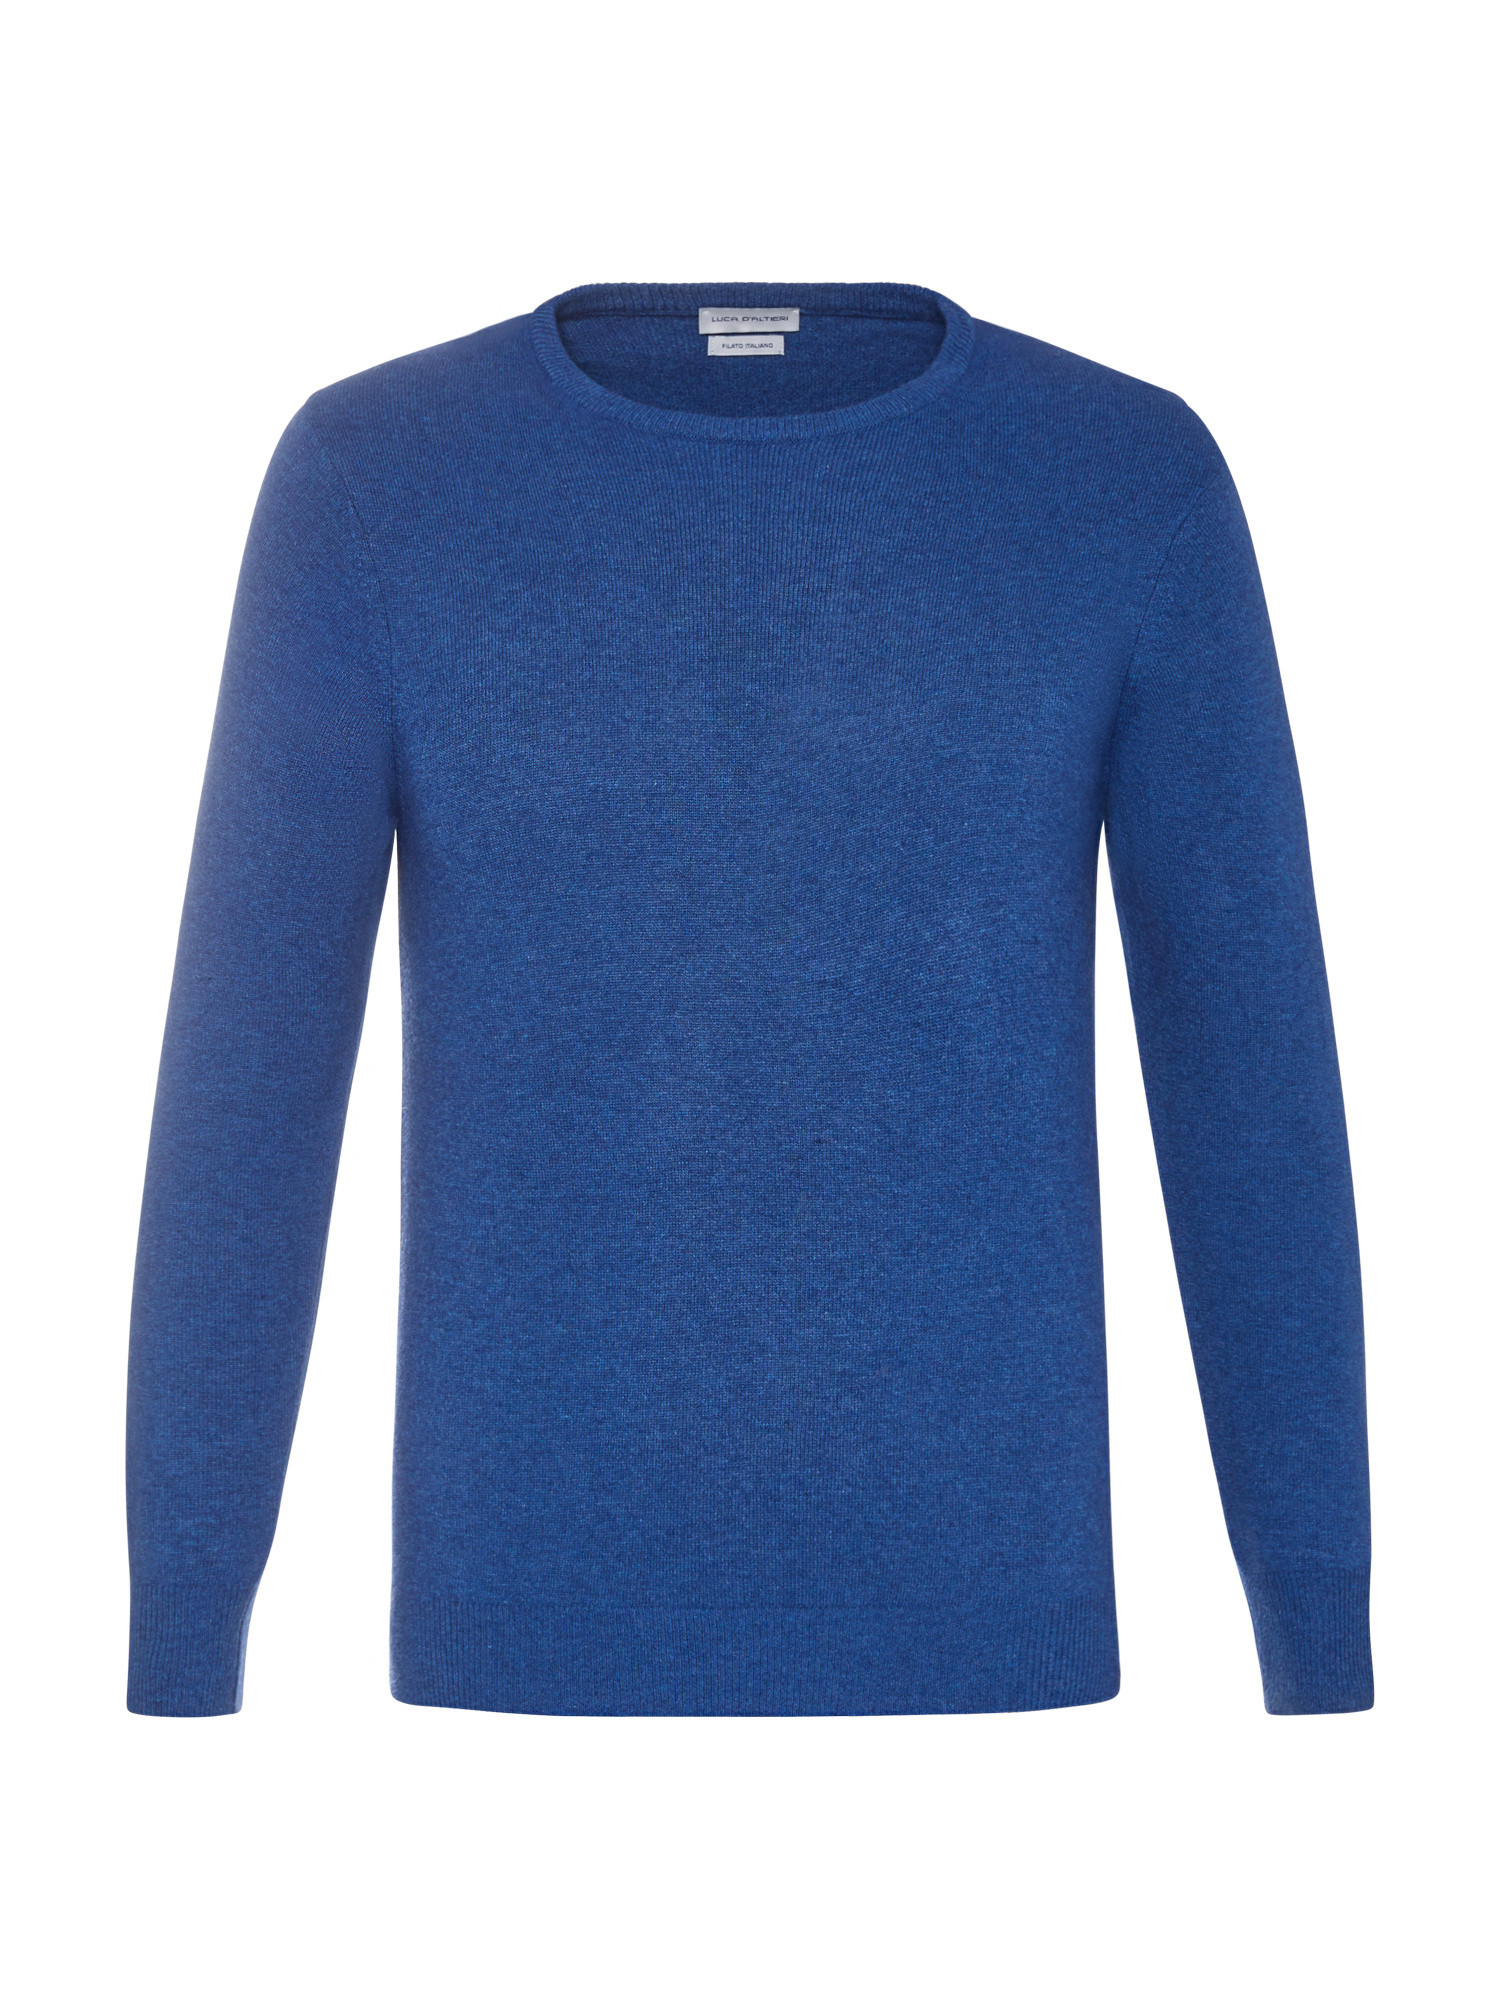 Luca D'Altieri - Cashmere Blend crew neck sweater with noble fibers, Aviation Blue, large image number 0